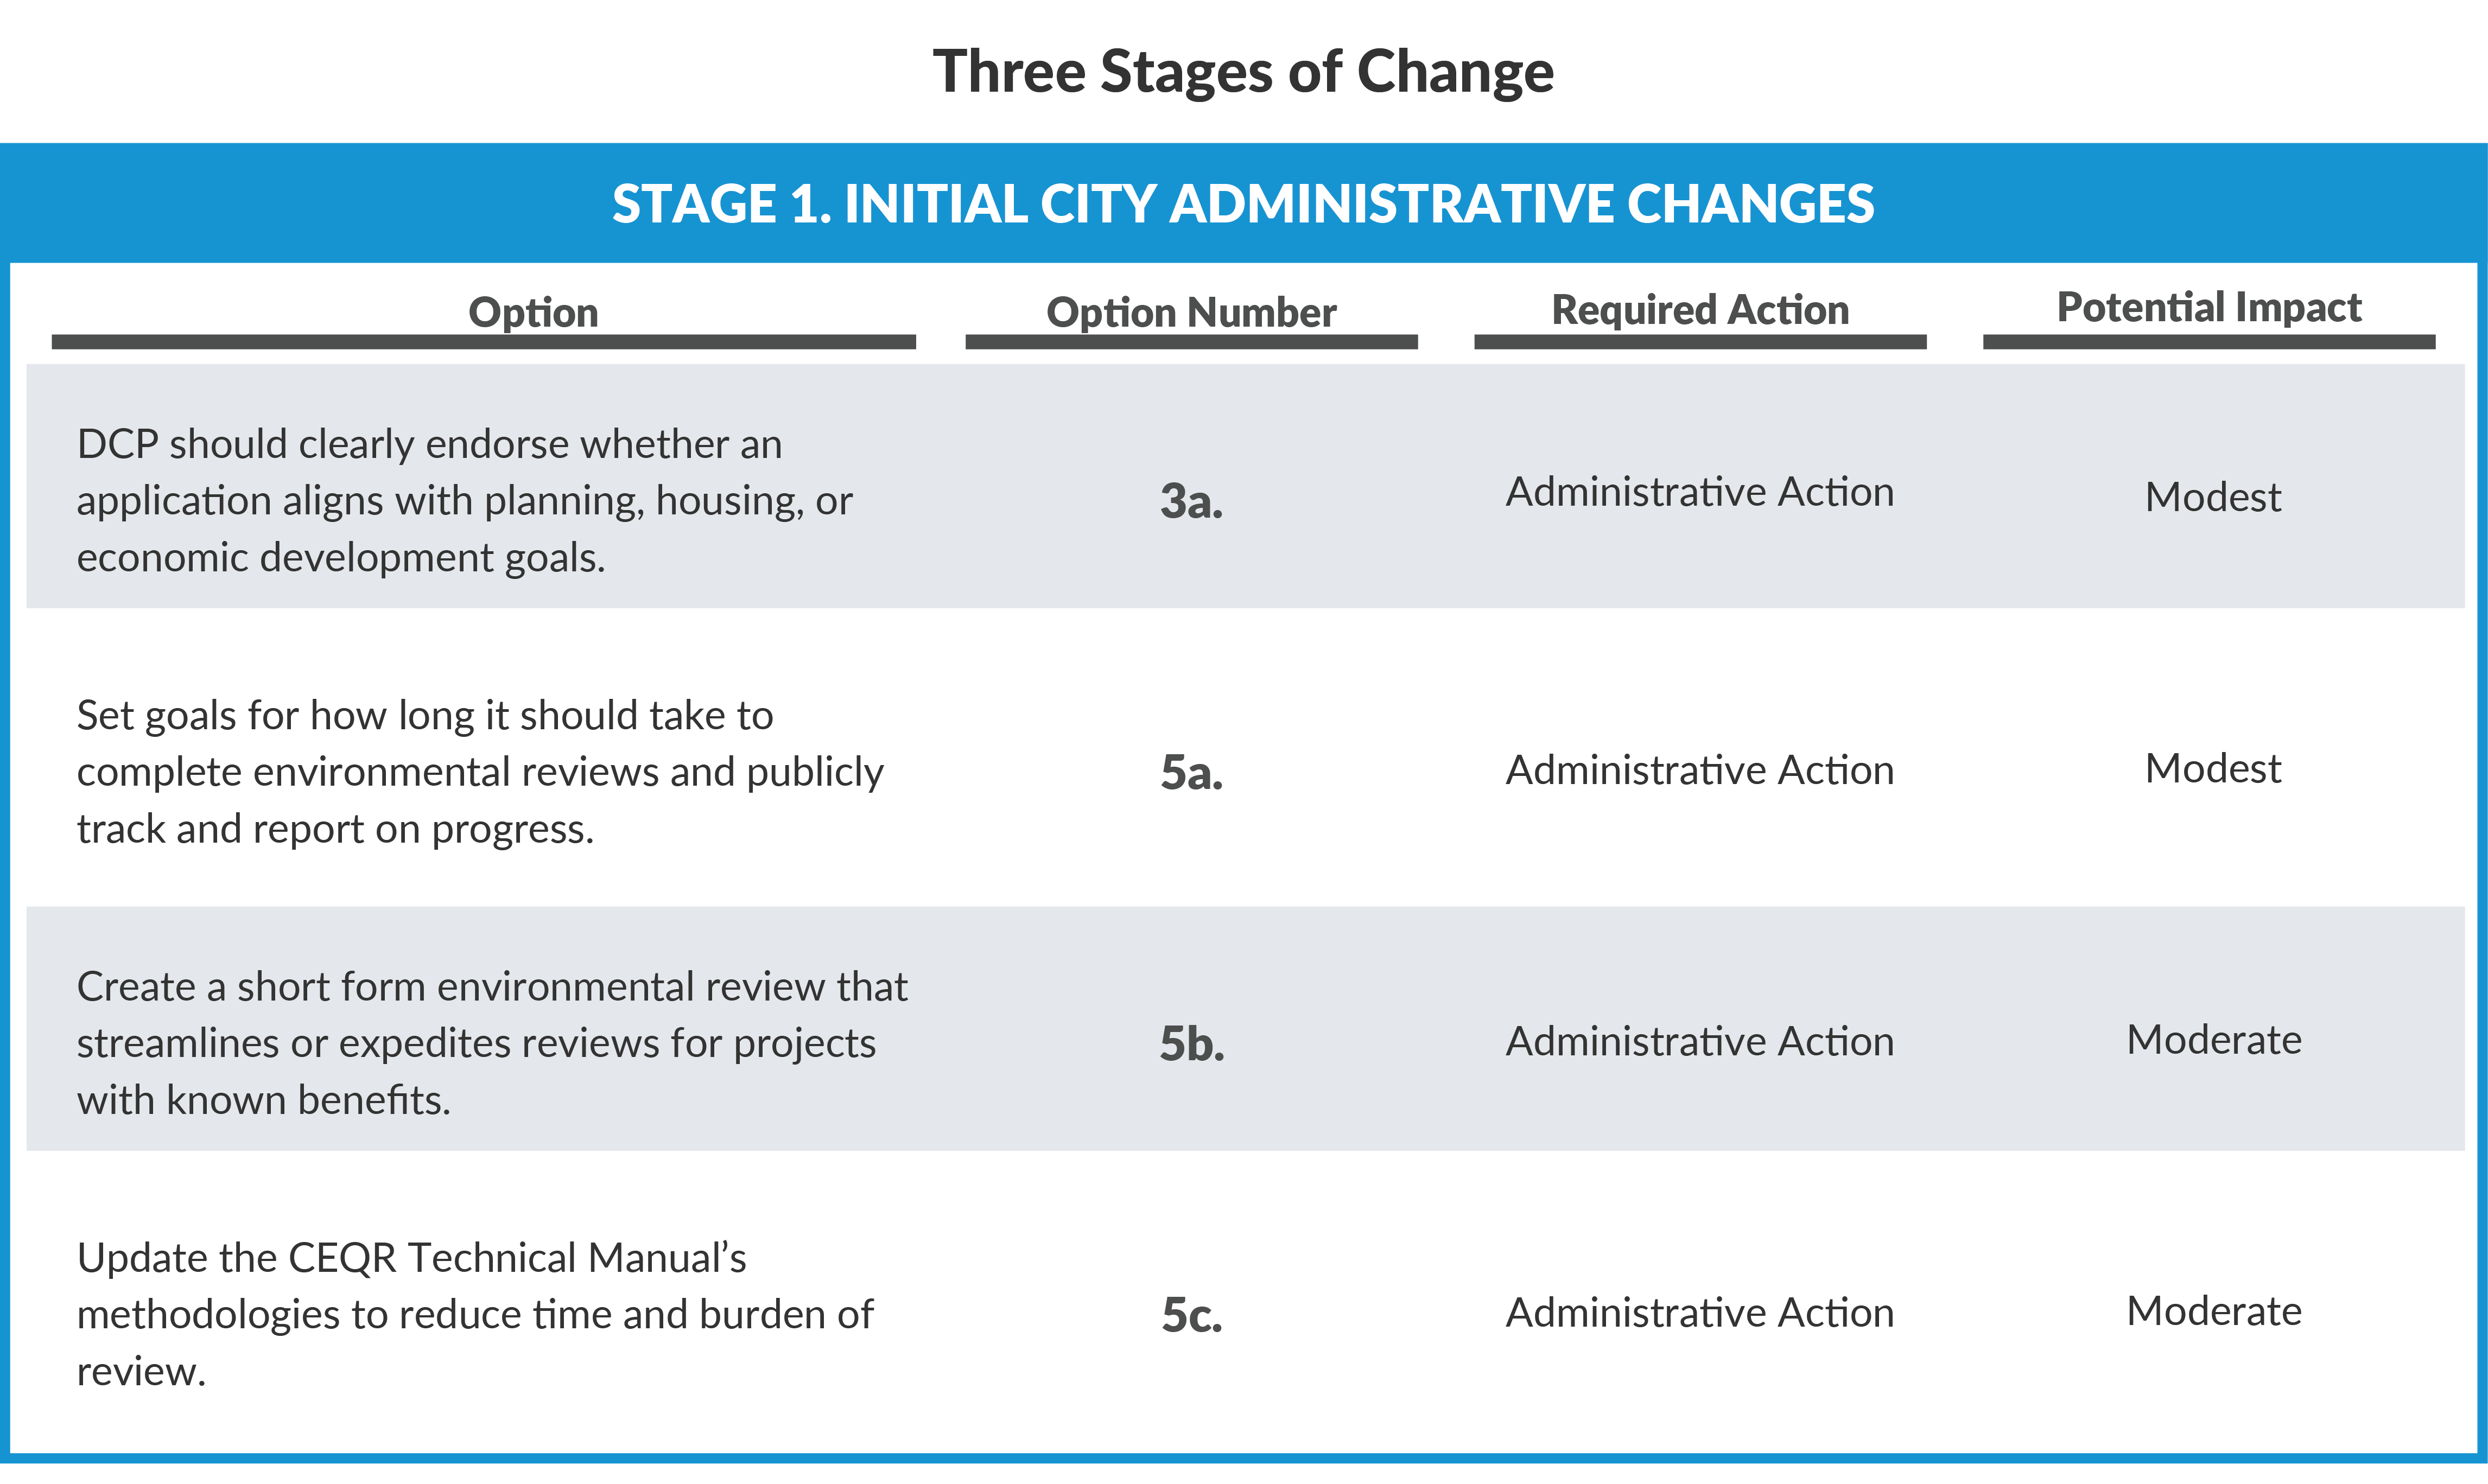 Stage 1. Initial City Administrative Changes